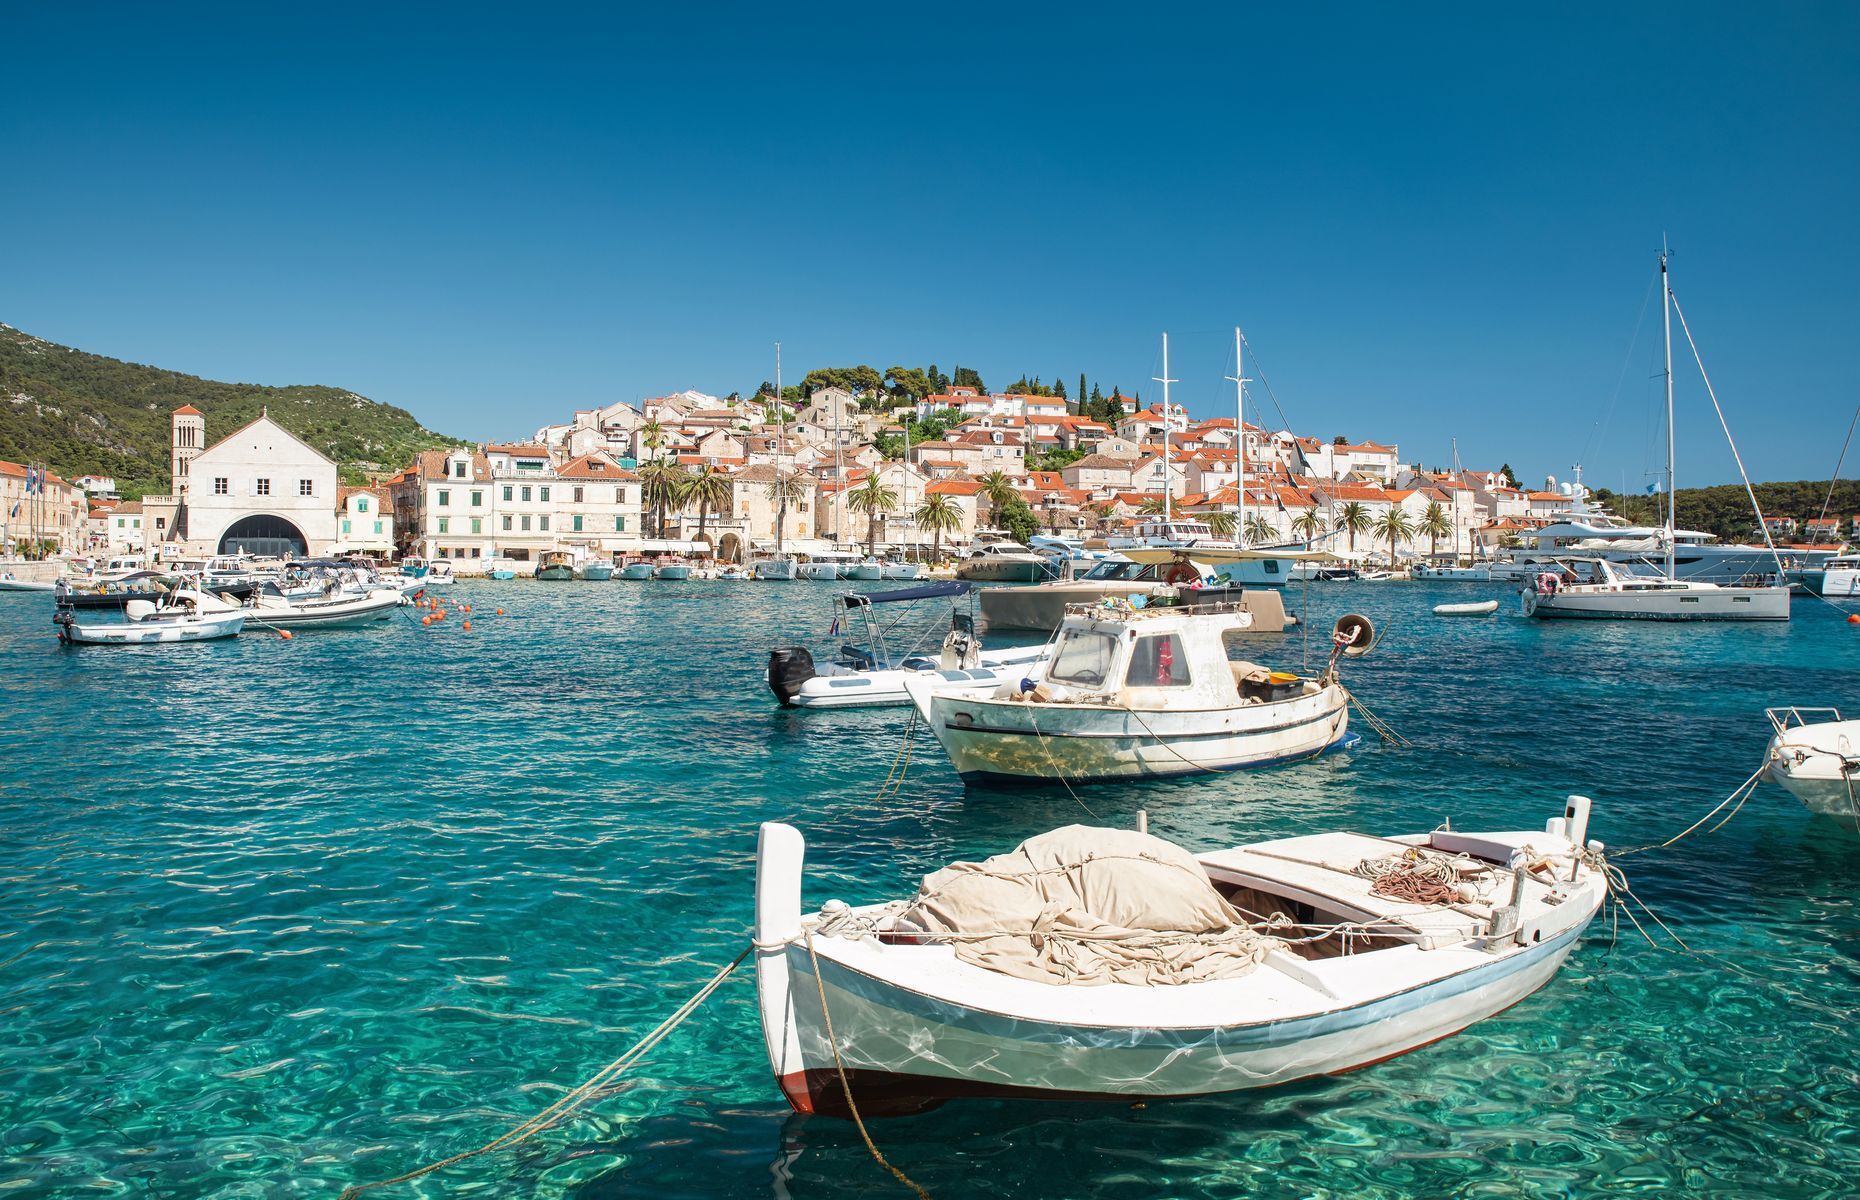 <a href="https://croatia.hr/en-gb/islands/hvar" rel="noreferrer noopener">Hvar’s</a> lively nightlife tends to attract festive travellers to one of Croatia’s most popular islands. Its breathtaking scenery and watersport-friendly seafront are also major draws. Easily accessed by ferry from Split, the island is home to numerous luxury hotels popular with celebrities as well as some of the best seafood restaurants in the country.